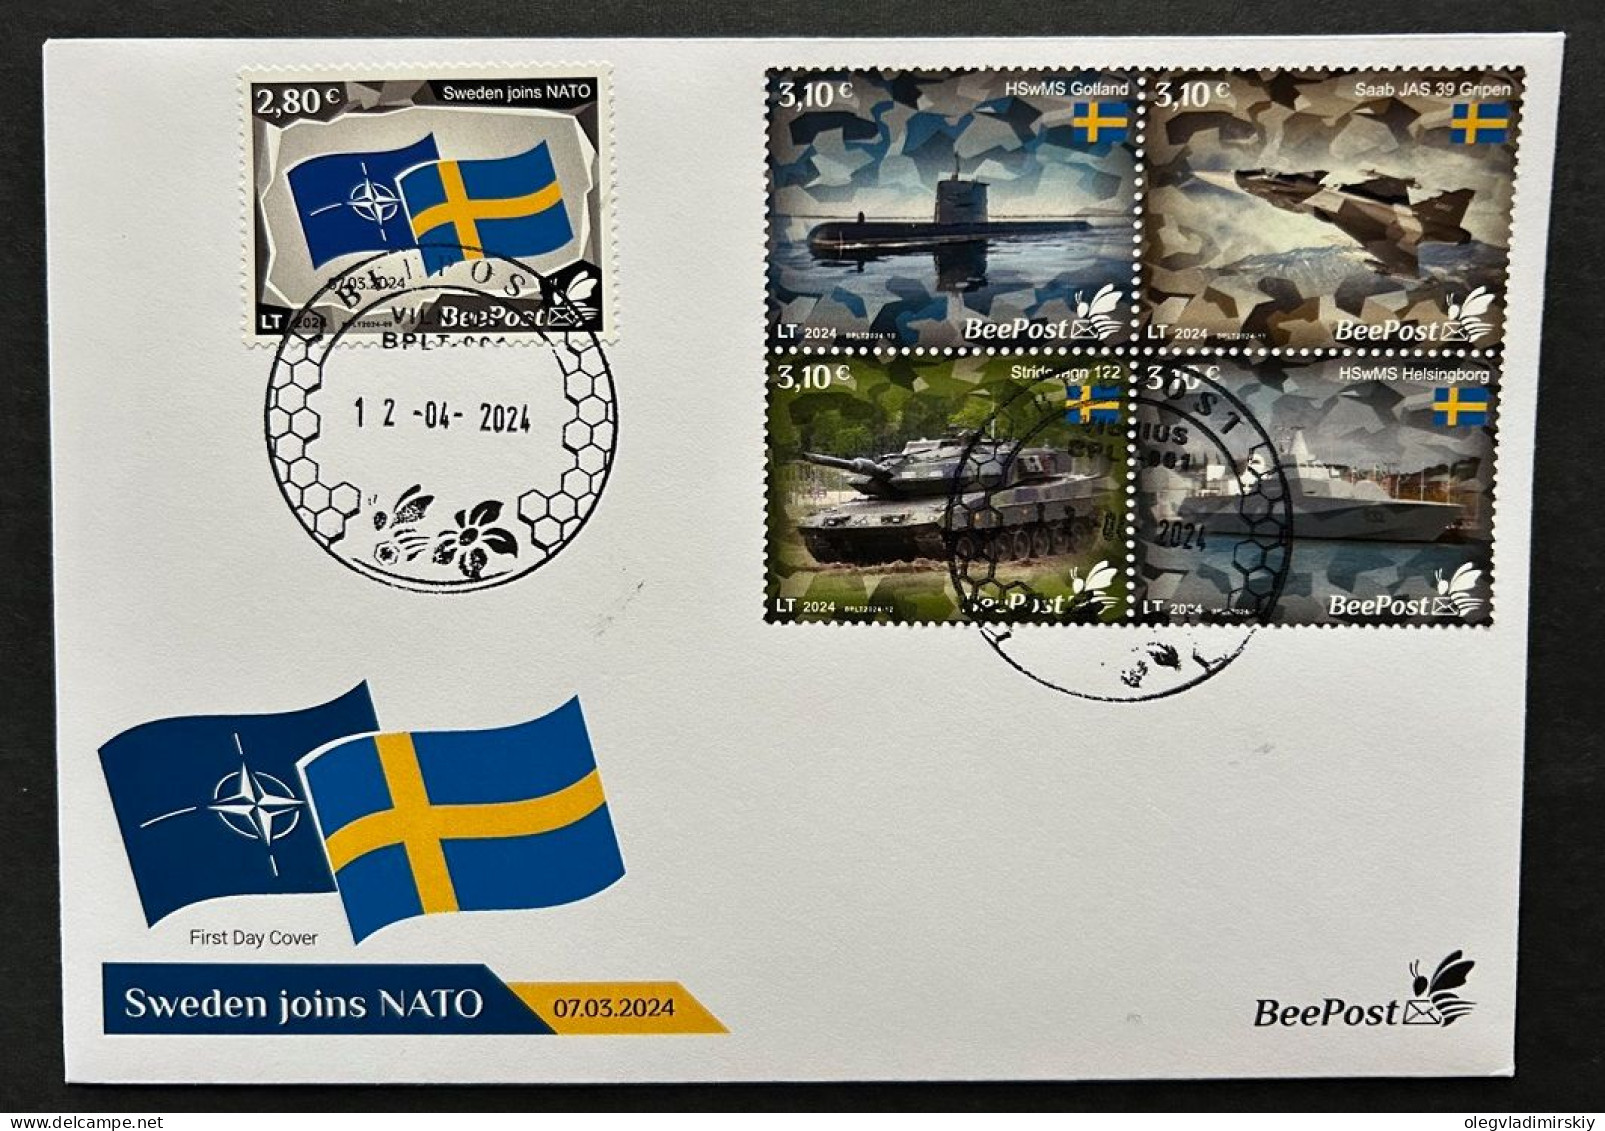 Lithuania 2024 Baltic - NATO Sea Sweden Joins NATO Tank Submarine Warship Airplane Flags BeePost Set Of 5 Stamps FDC - Sottomarini